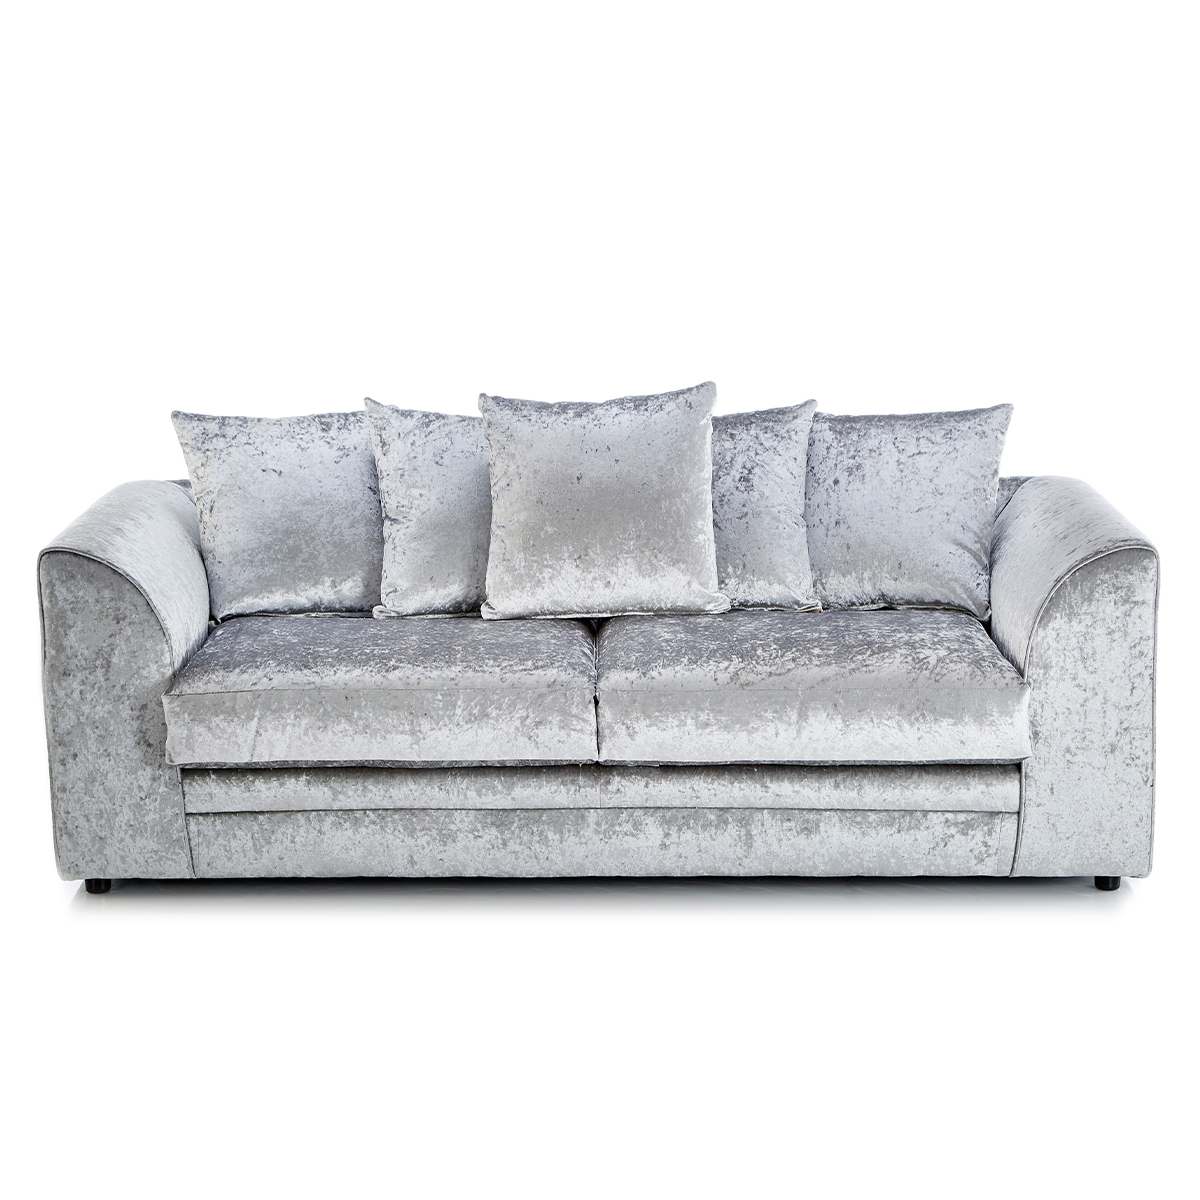 Crystal Crushed Velvet 3 Seater Sofa – Silver – The Online Sofa Shop